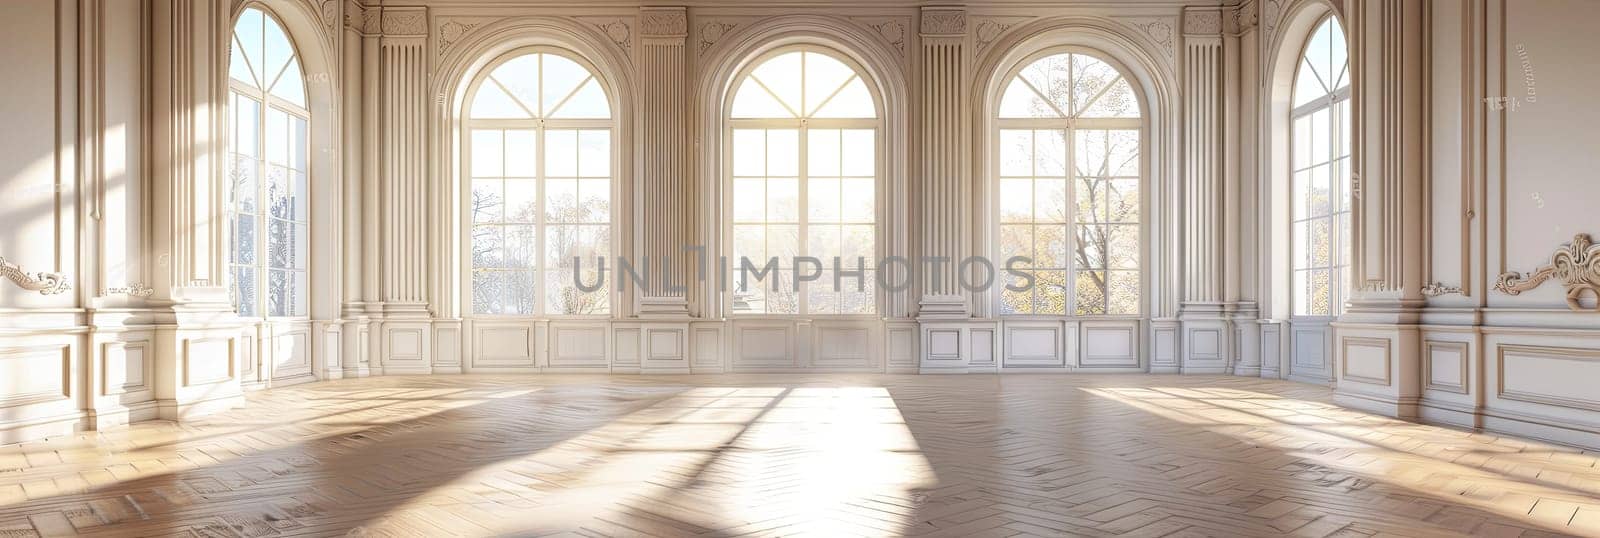 Vintage-style empty banquet hall with a parquet floor and numerous large windows.